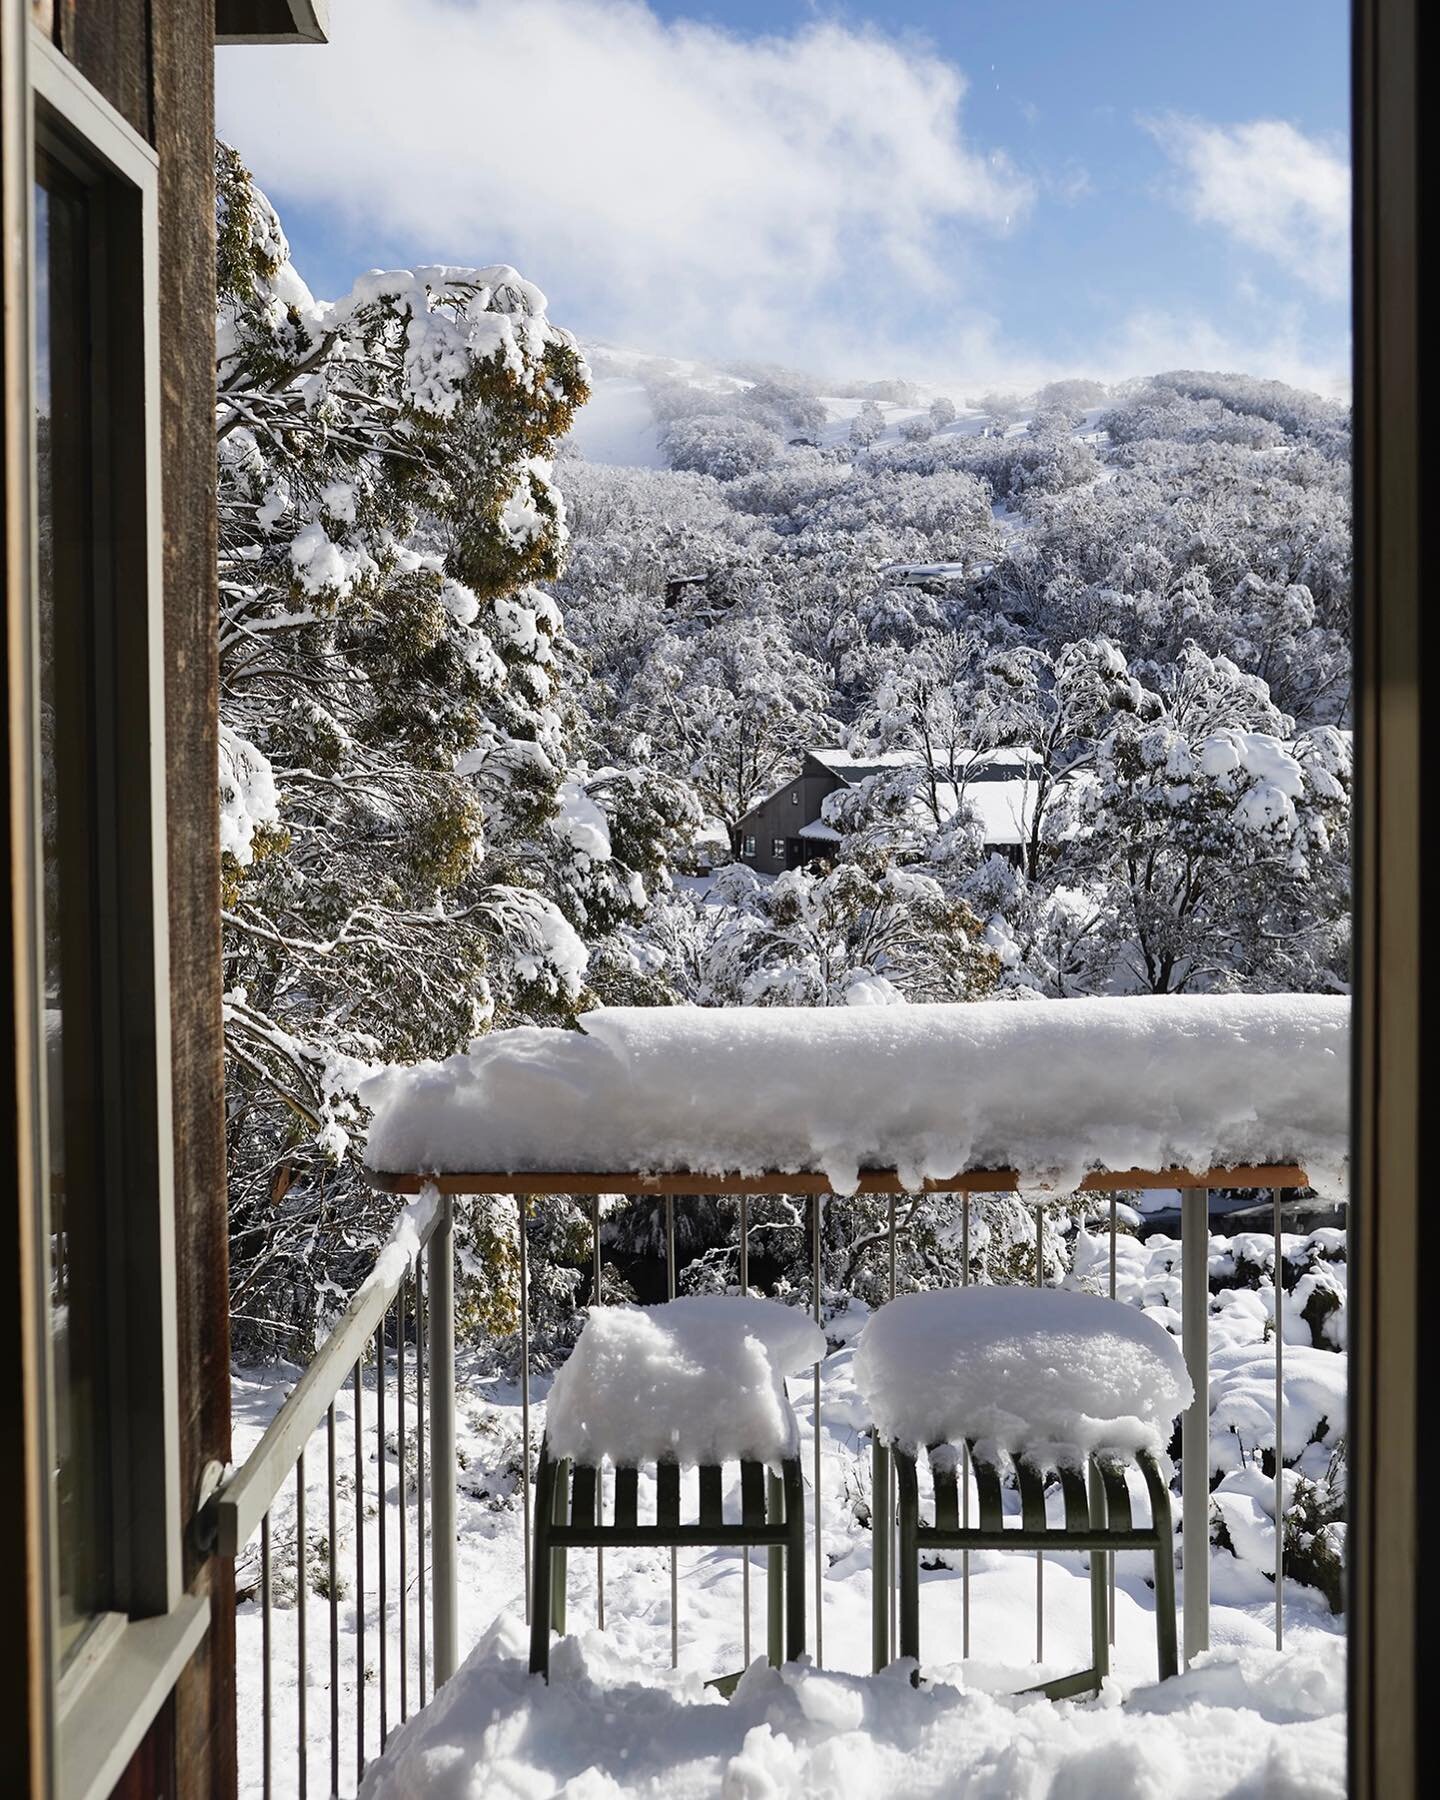 LAST MINUTE CANCELLATION: Shout-out to skiers and boarders outside of Sydney. We&rsquo;ve had a last minute cancellation for the Cedar Cabin and Oak Apartment.

28 June - 9 July. DM or jump online if you&rsquo;re keen.

We had a cracker of an opening